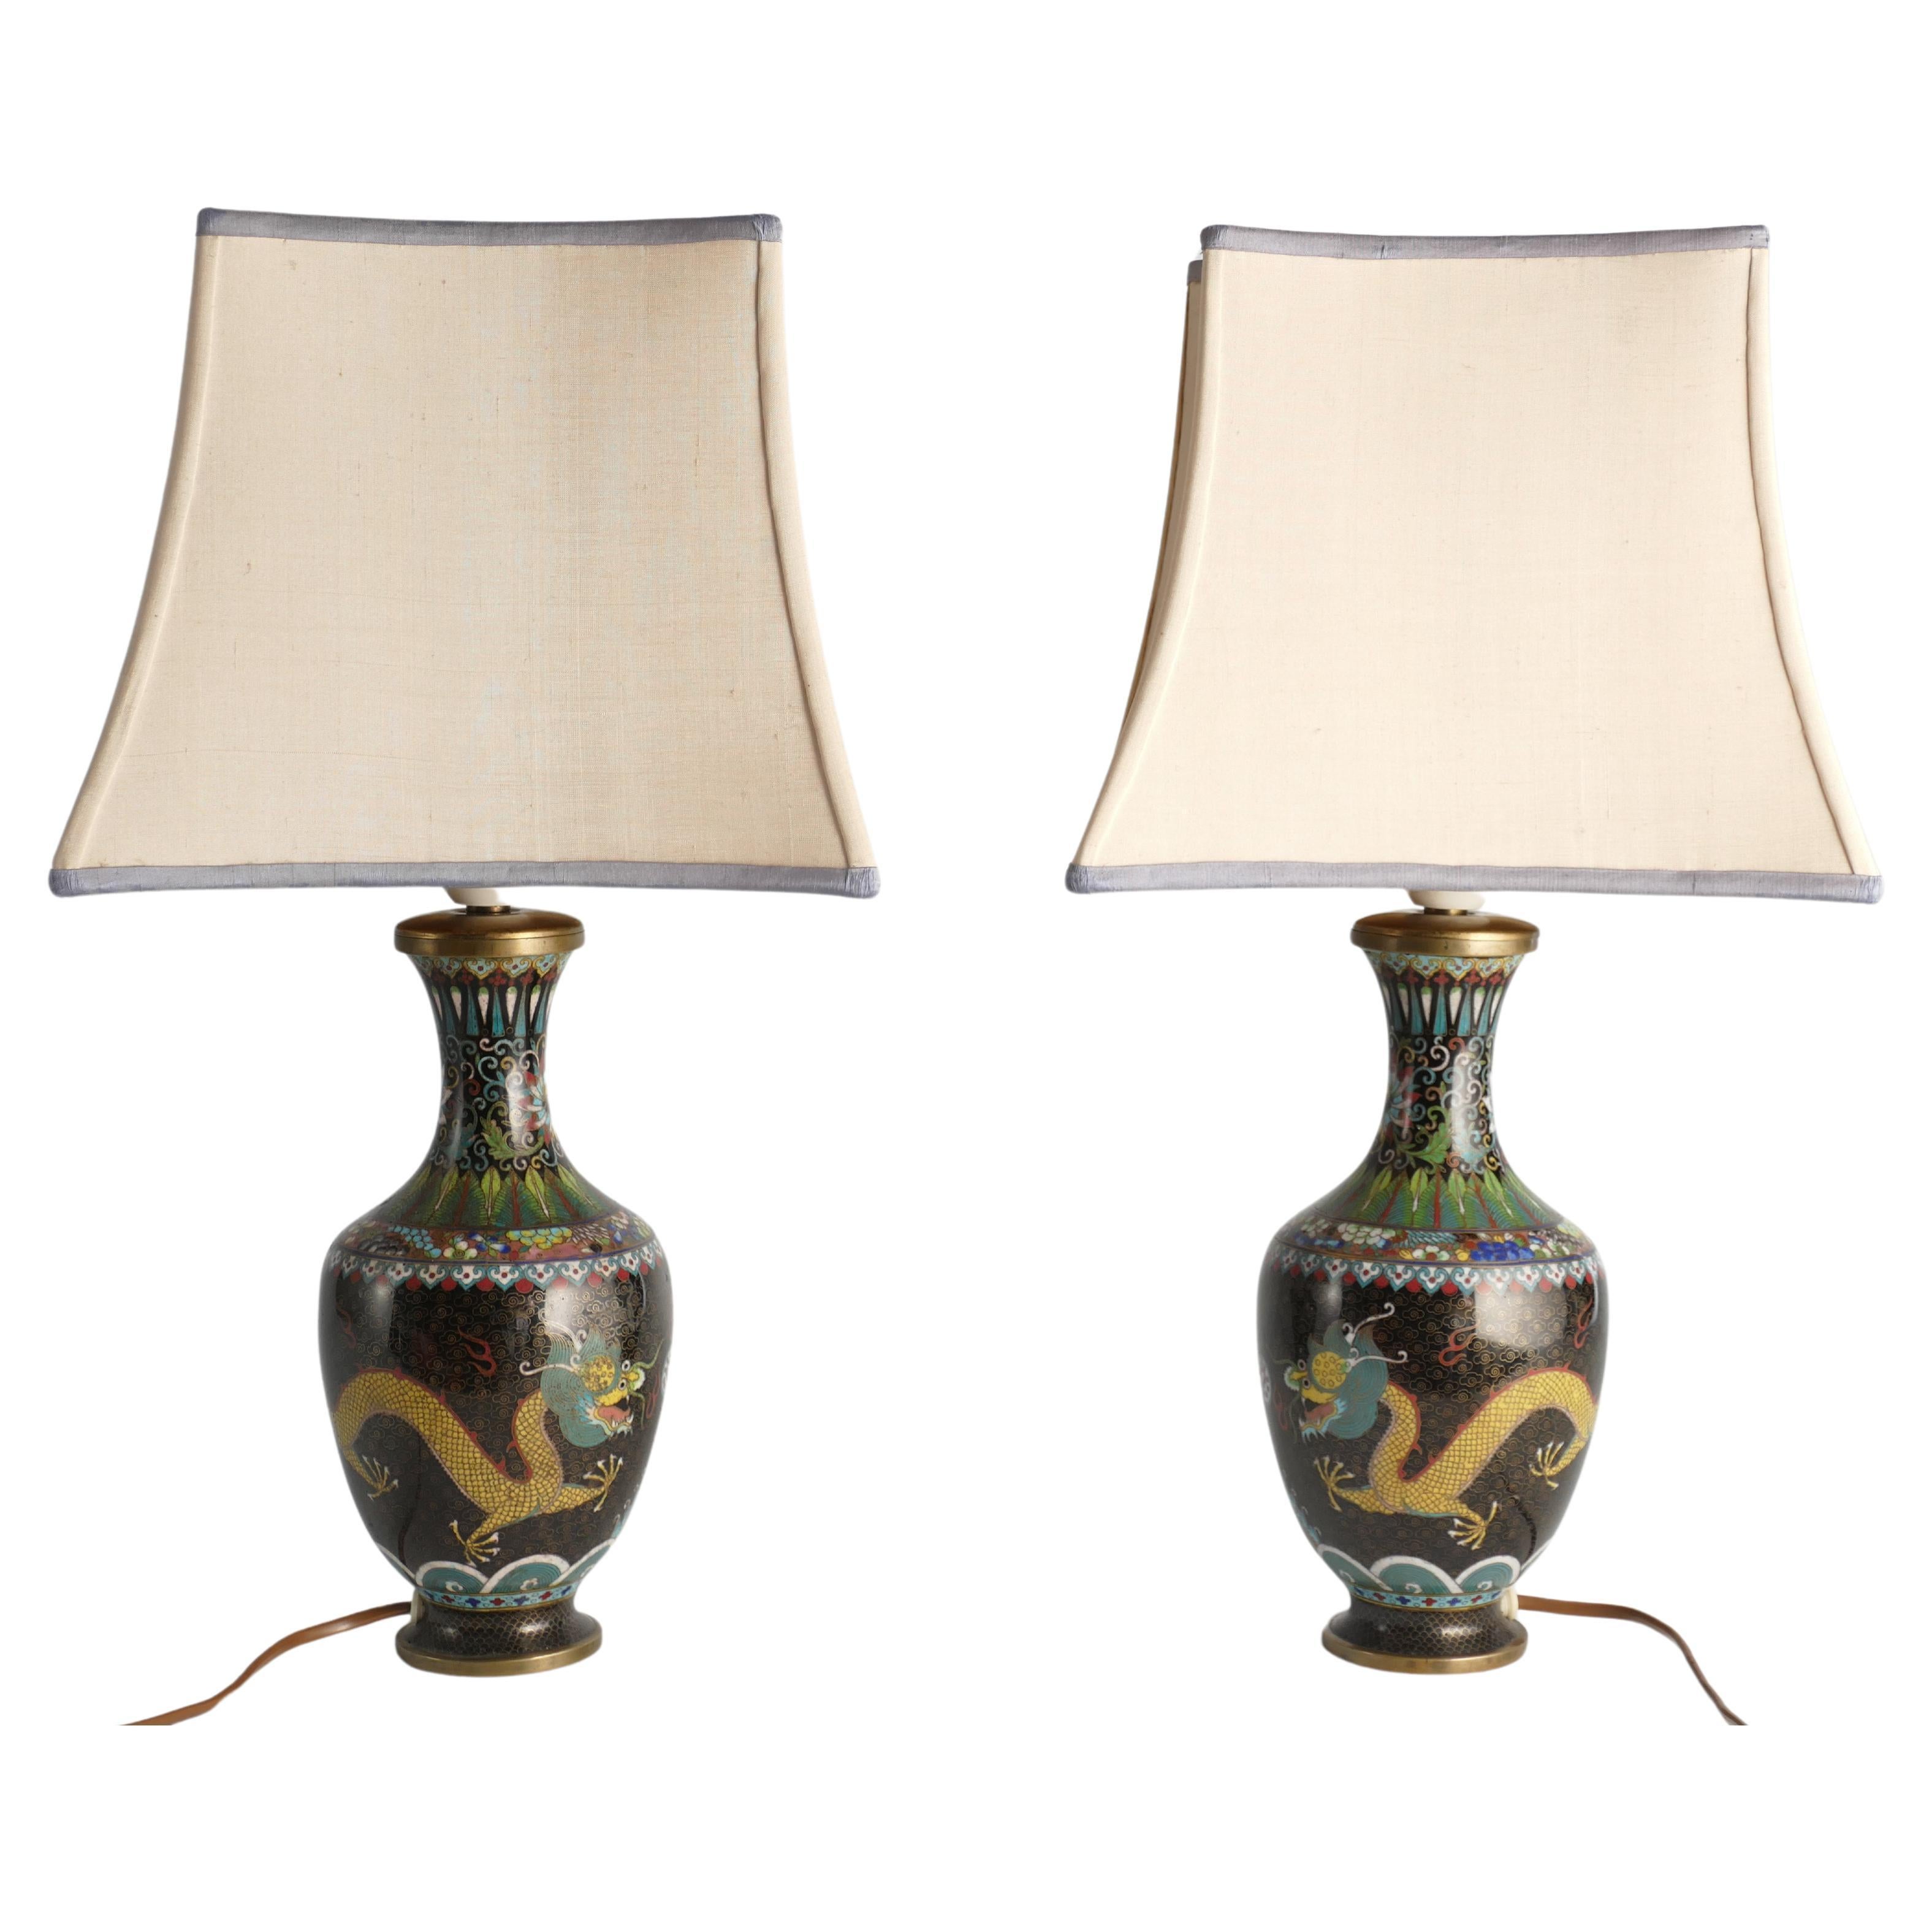 Early 20th-century Famille Noire Chinese Cloisonne Yellow Dragon Table Lamps For Sale